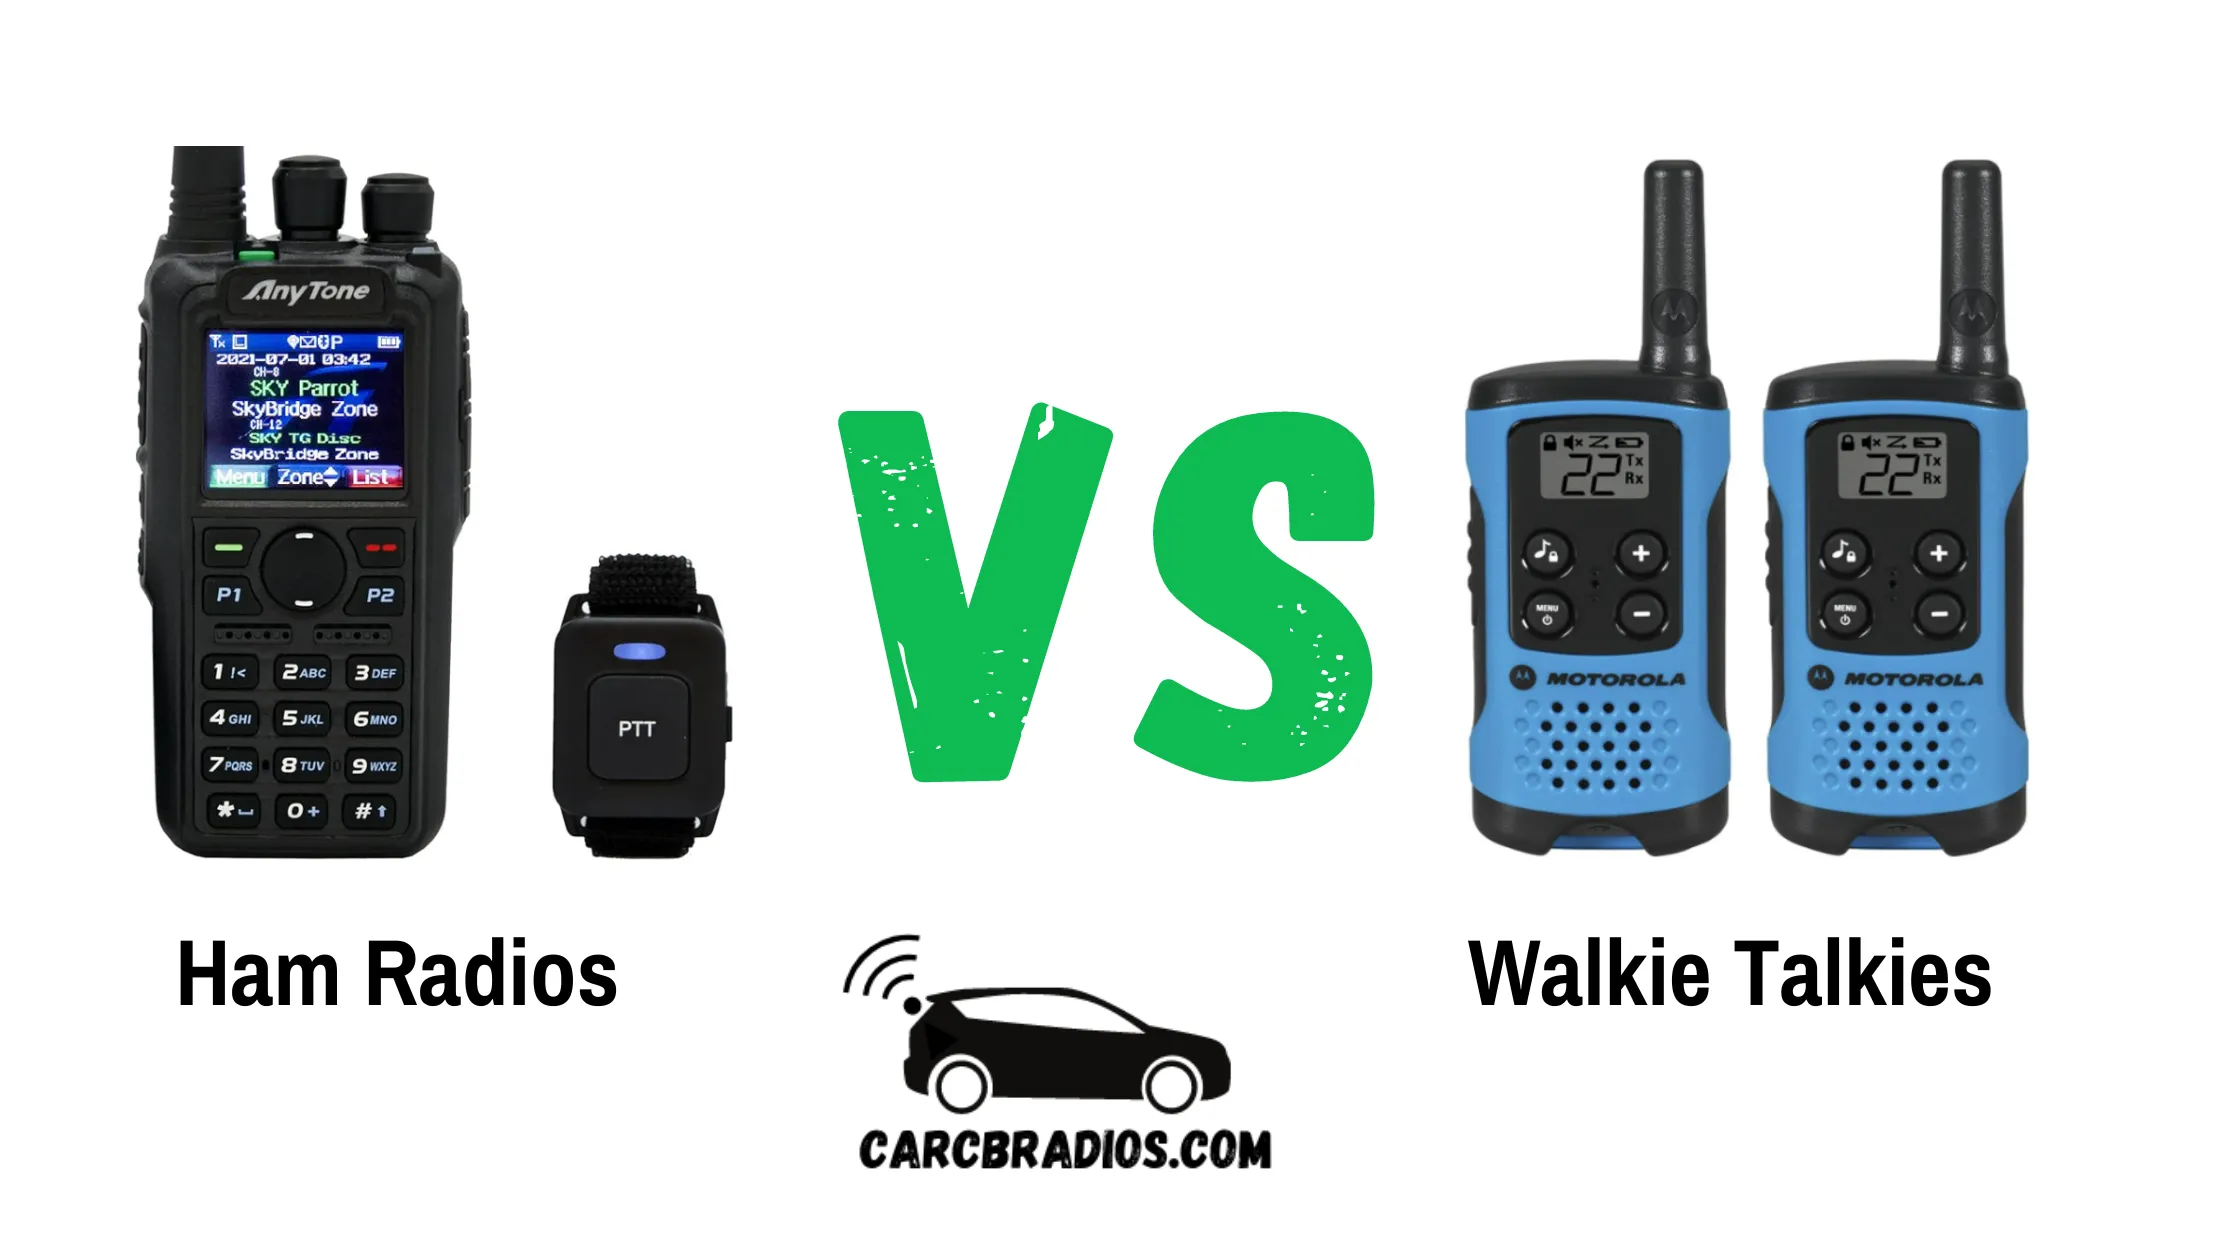 Ham radios and walkie-talkies both have their own unique features and benefits, and it's important to understand these differences before making a decision. By the end of this article, you will have a better understanding of the advantages and disadvantages of each device, and be able to make an informed decision about which one is the best fit for your specific needs.